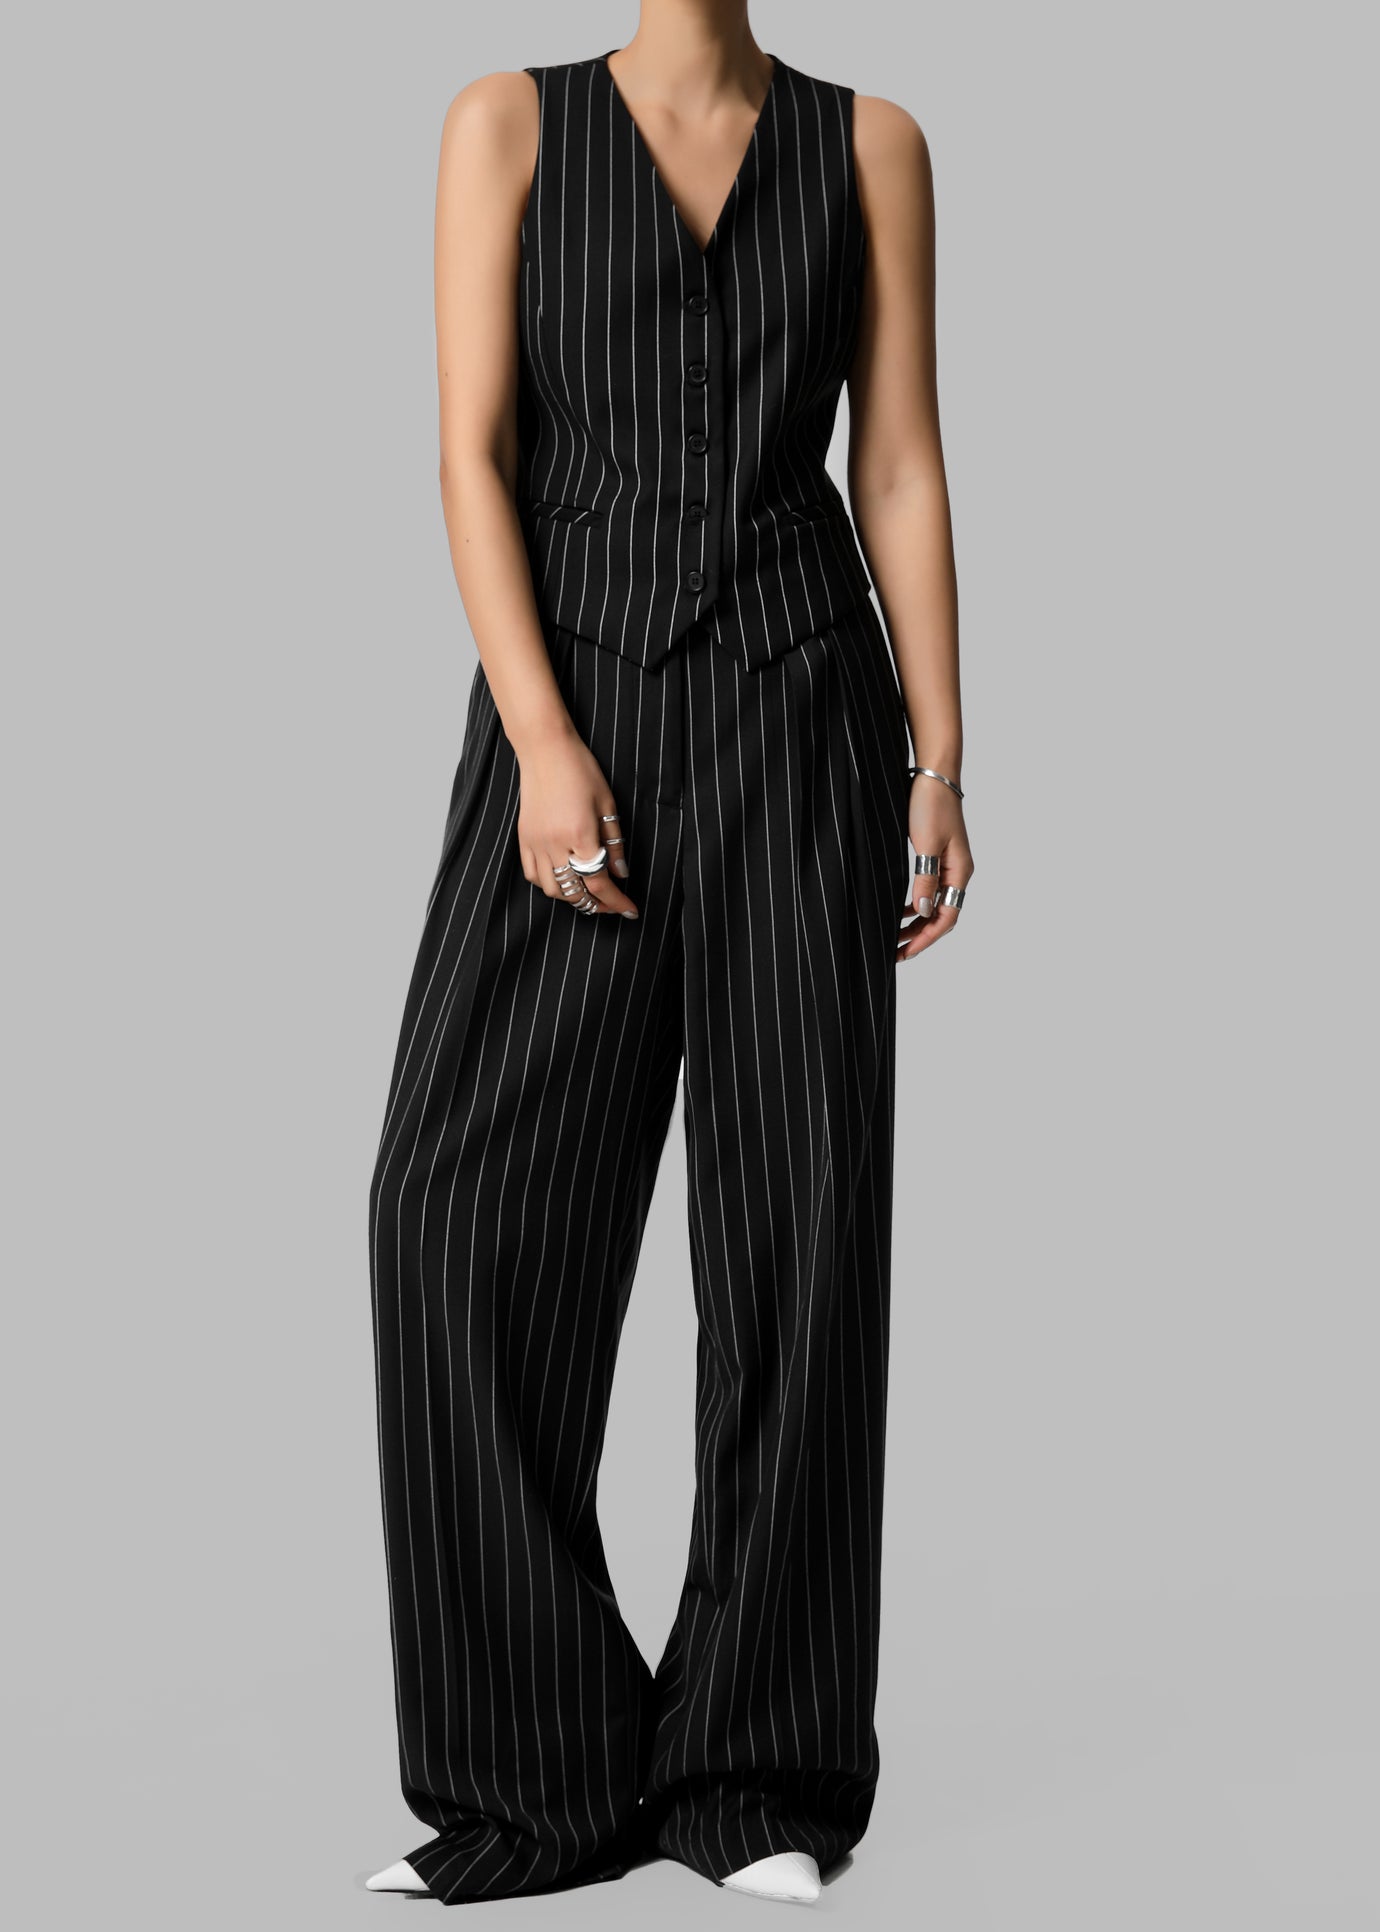 Holland Pleated Trousers - Black/White Pinstripe - 1